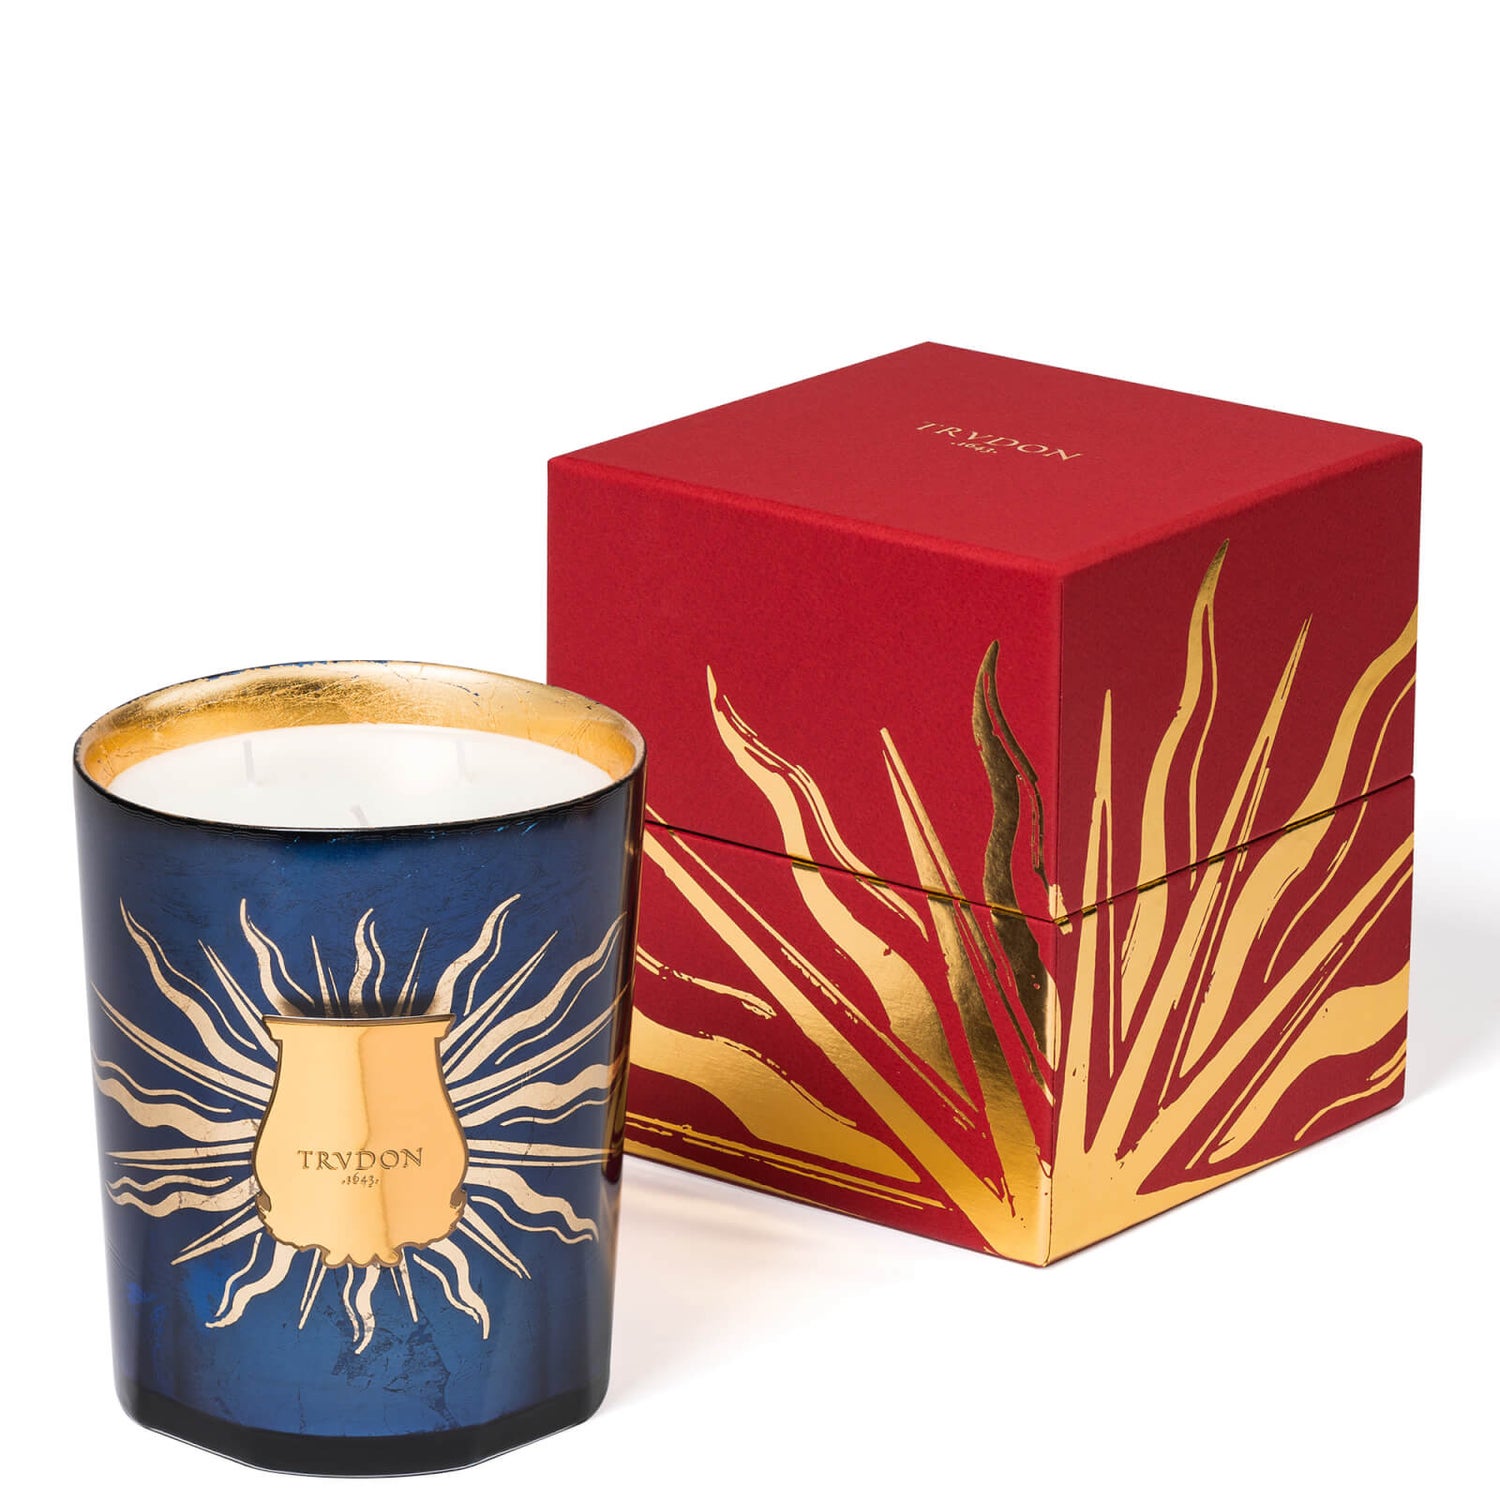 TRUDON Scented Fir Candle 800g | SkinStore